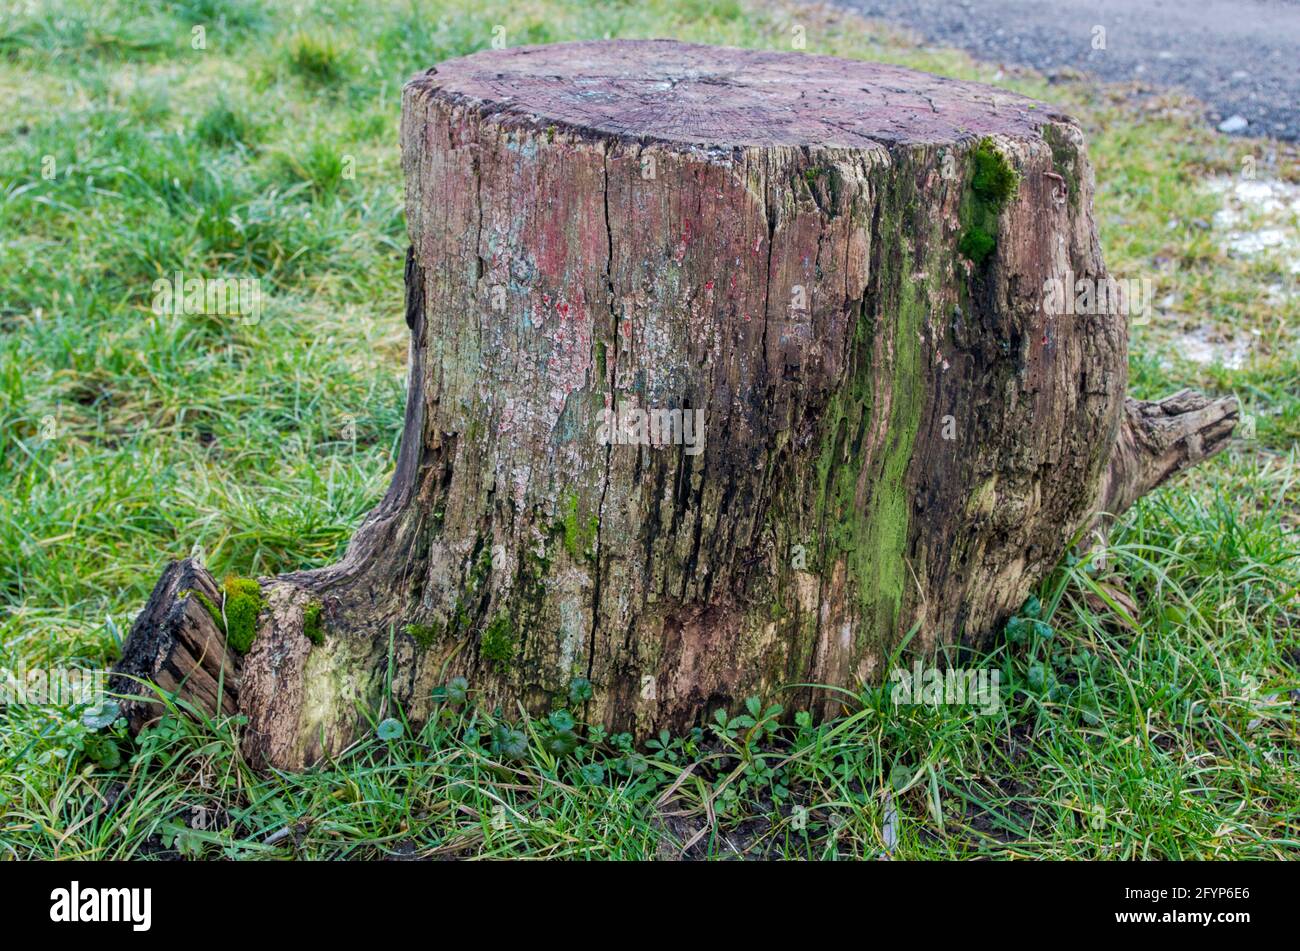 Brown-gray old stump with peeling bark, traces of moss and fungus, sticking out in middle of tufts of green grass near road with asphalt surface. Conc Stock Photo